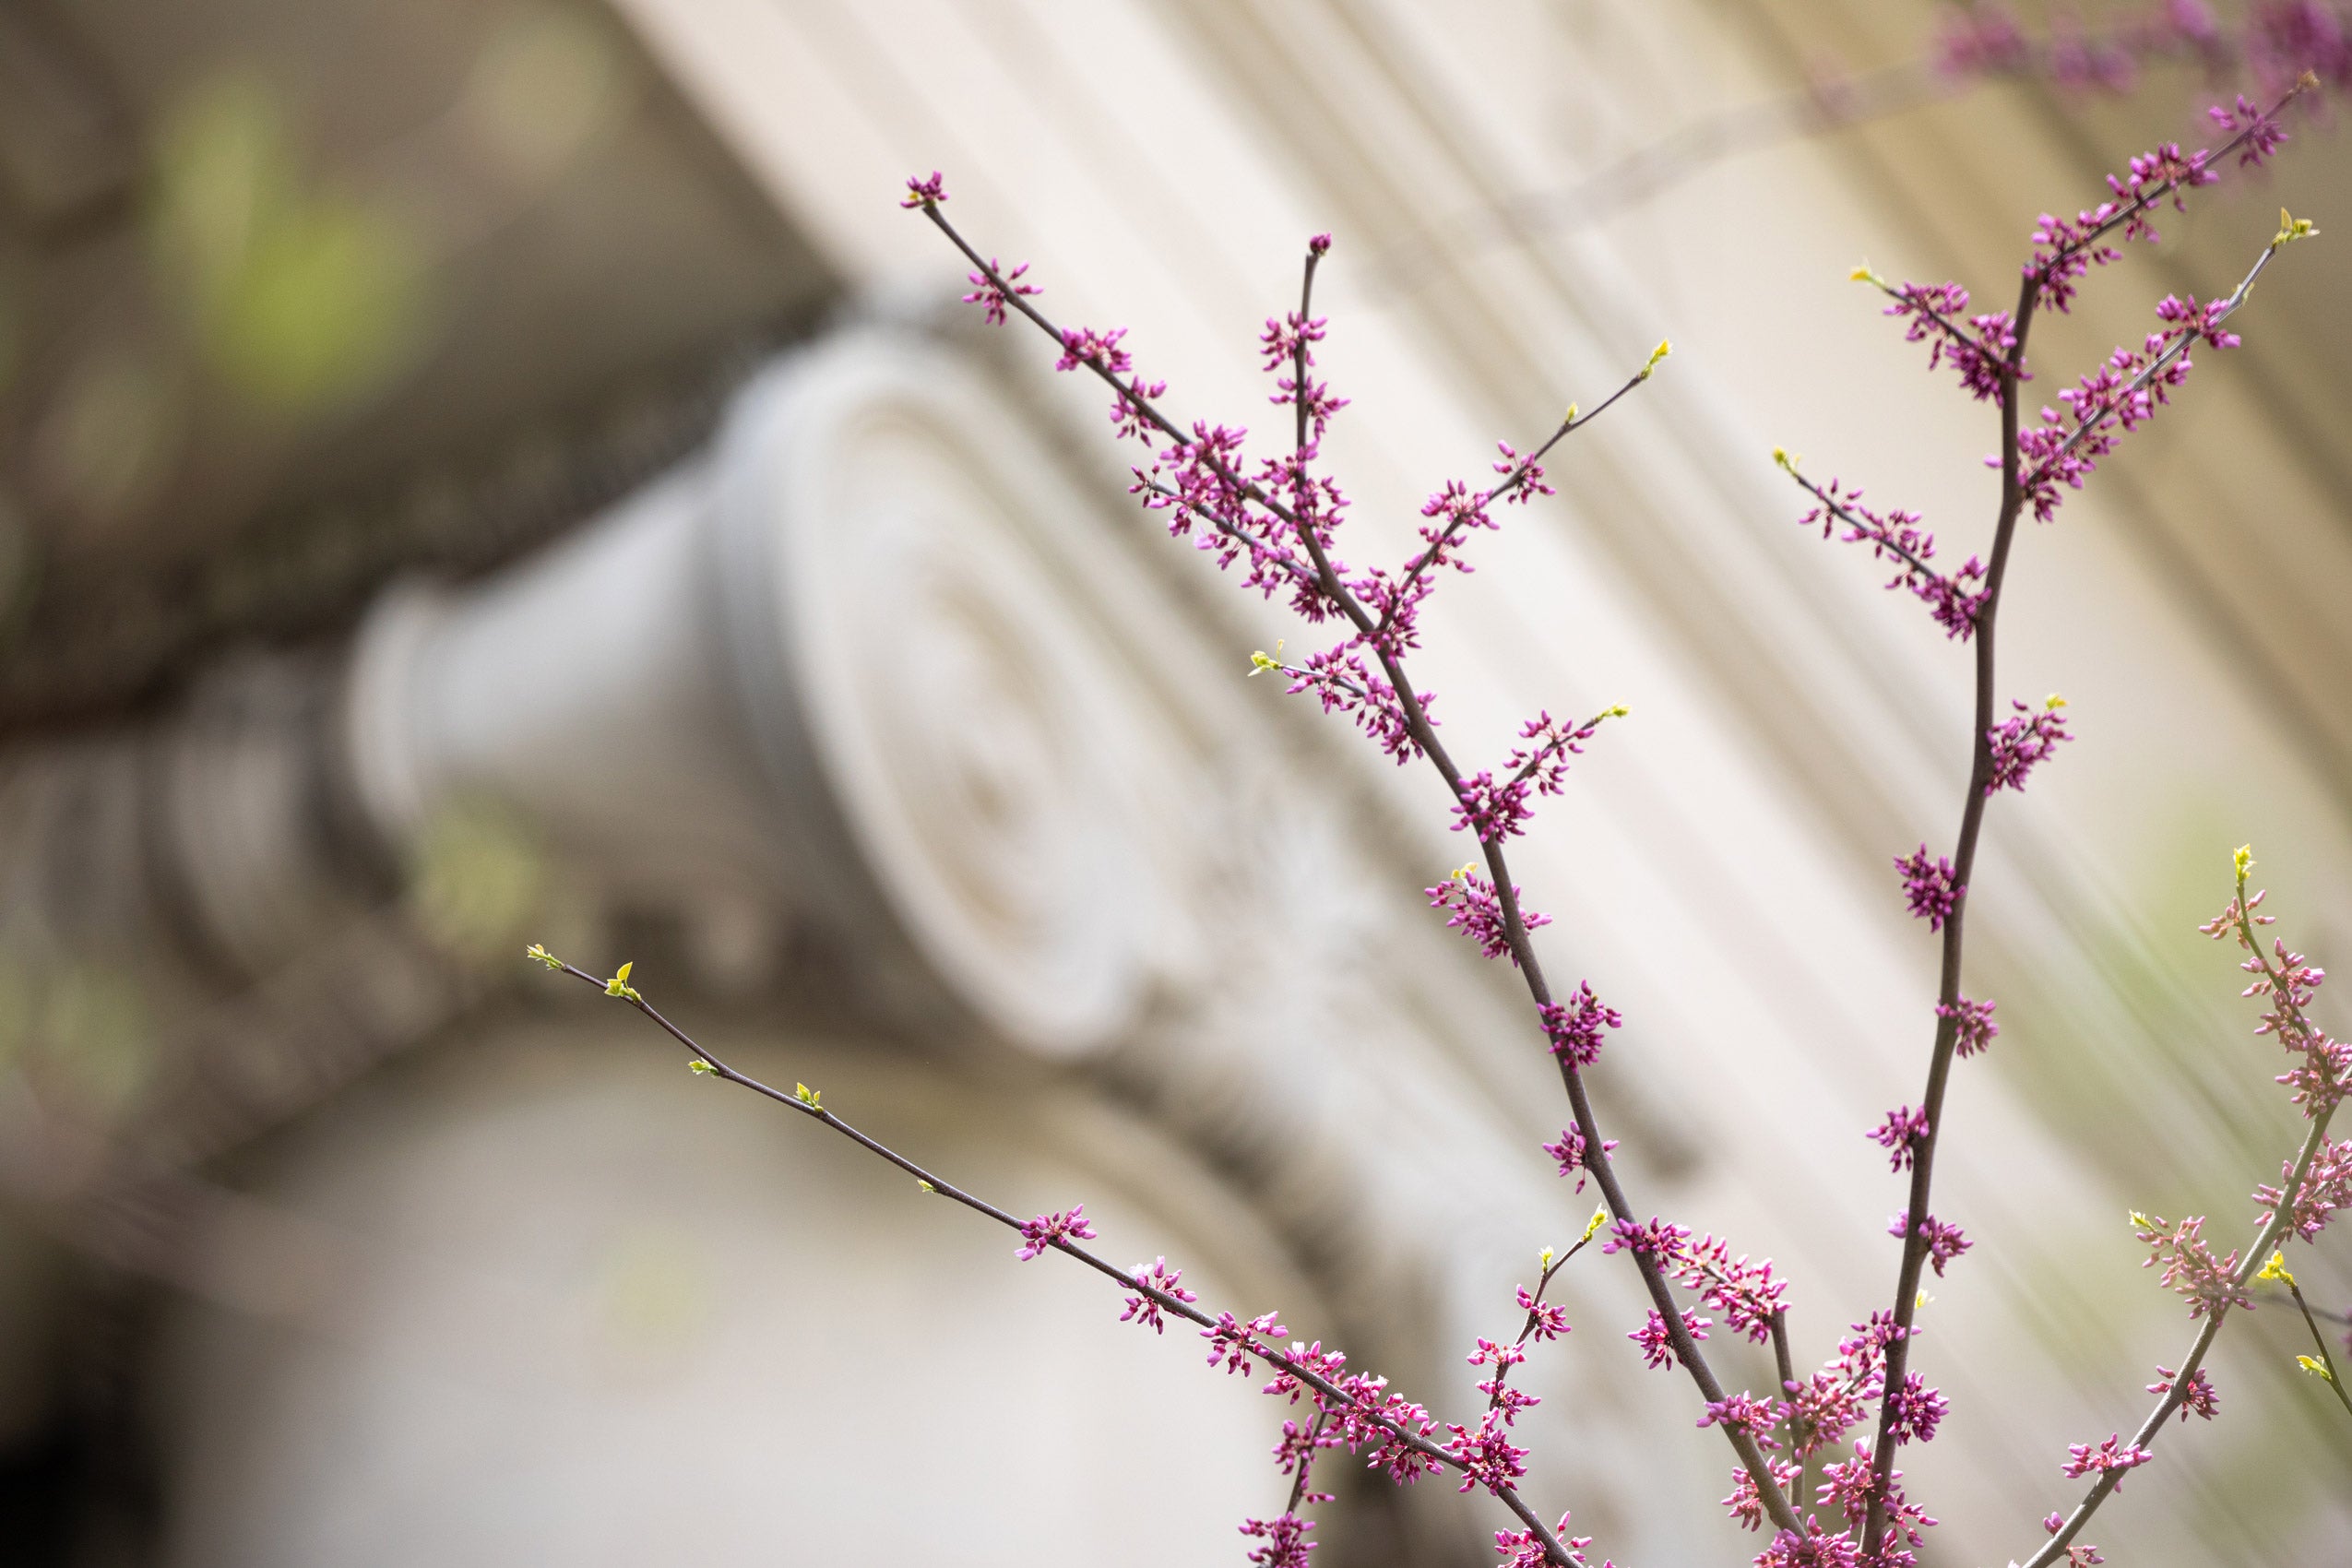 delicate pink flower branch agains blurred view of building